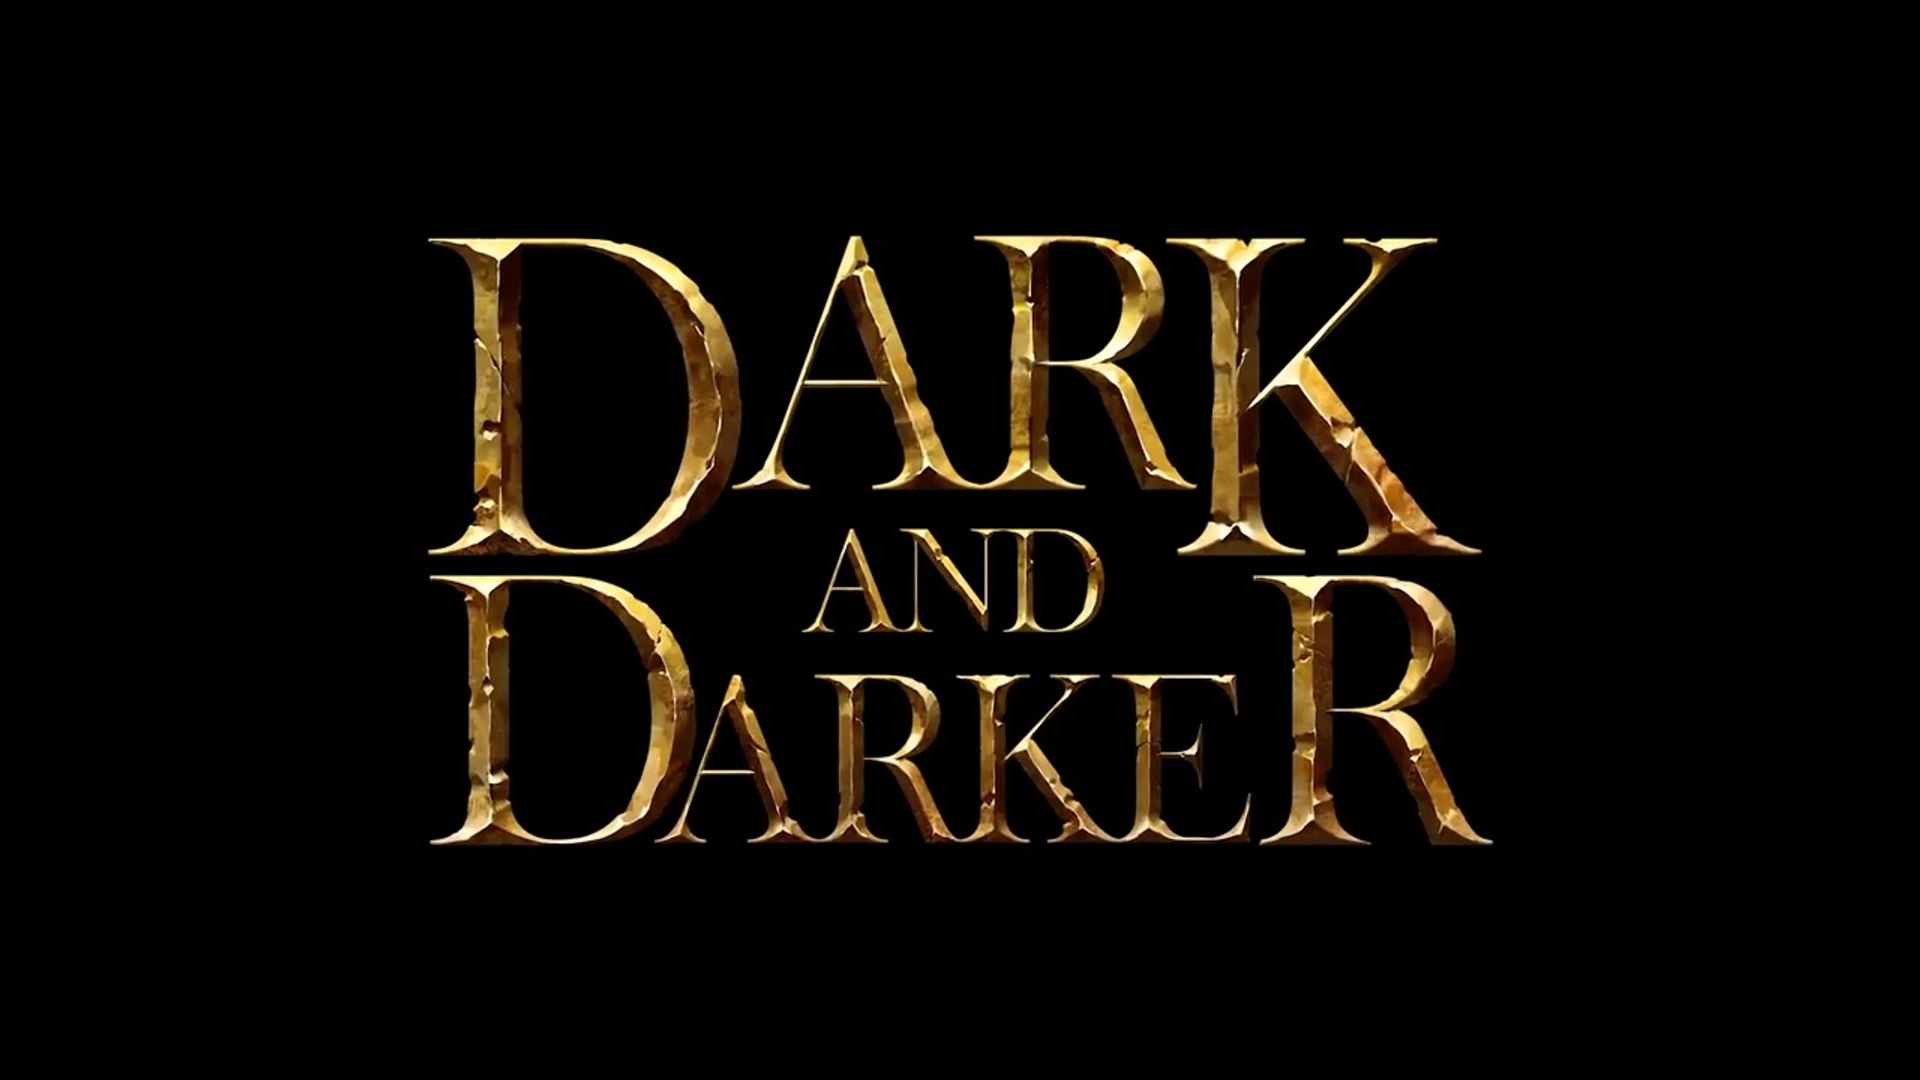 Is Dark and Darker coming to PS5 and PS4?